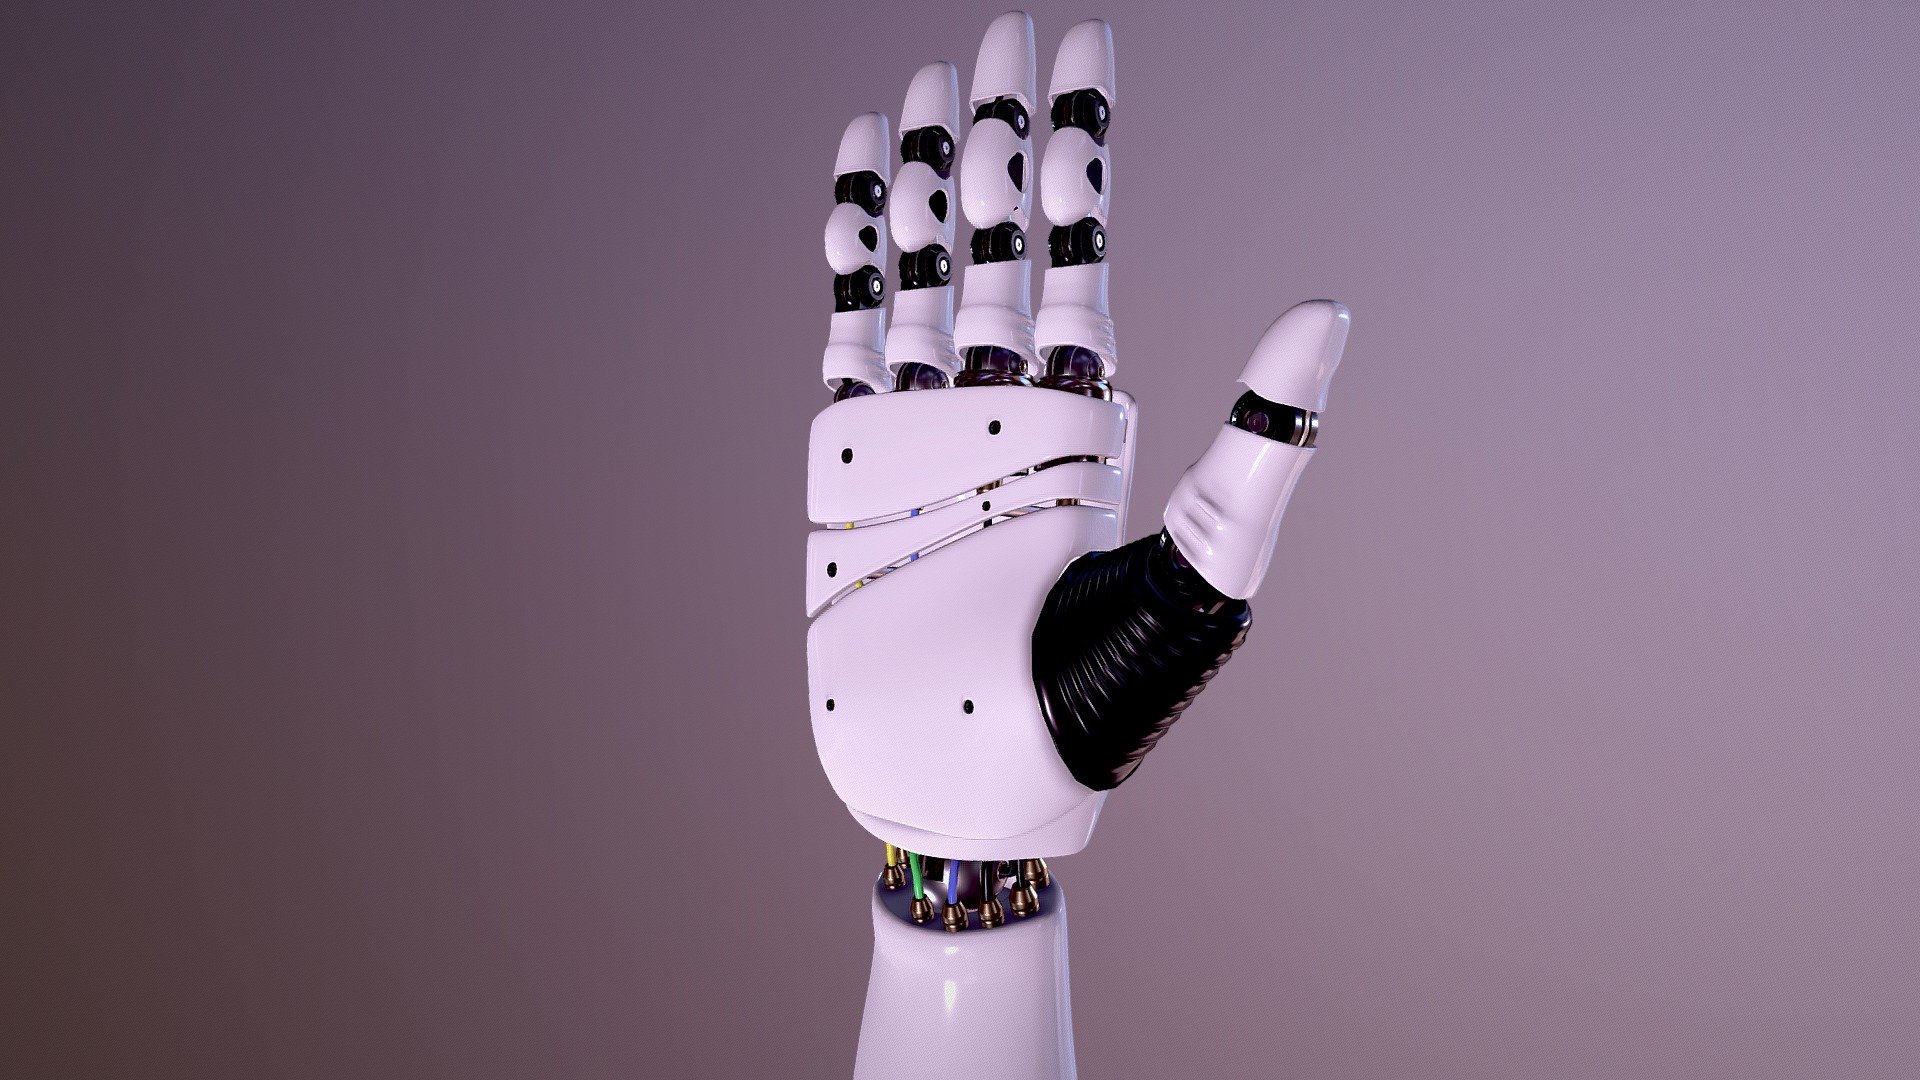 igh quality model of ROBOTIC HAND

*- Rigged and animated with Bones System

- to all objects and materials in a scene names are appropriated

- original file format - max 2014
- system units - centimetrs

*- Robotic hand have Unwrapped uv map non overlapped polygon.

Textures:
1) Robot_Hand_material_ID - PNG 4096 x 4096
2) Robot_Hand_wareframe - PNG 4096 x 4096
3) others draw yourself how you prefer - Robot Hand 3D model - Buy Royalty Free 3D model by omg3d 3d model